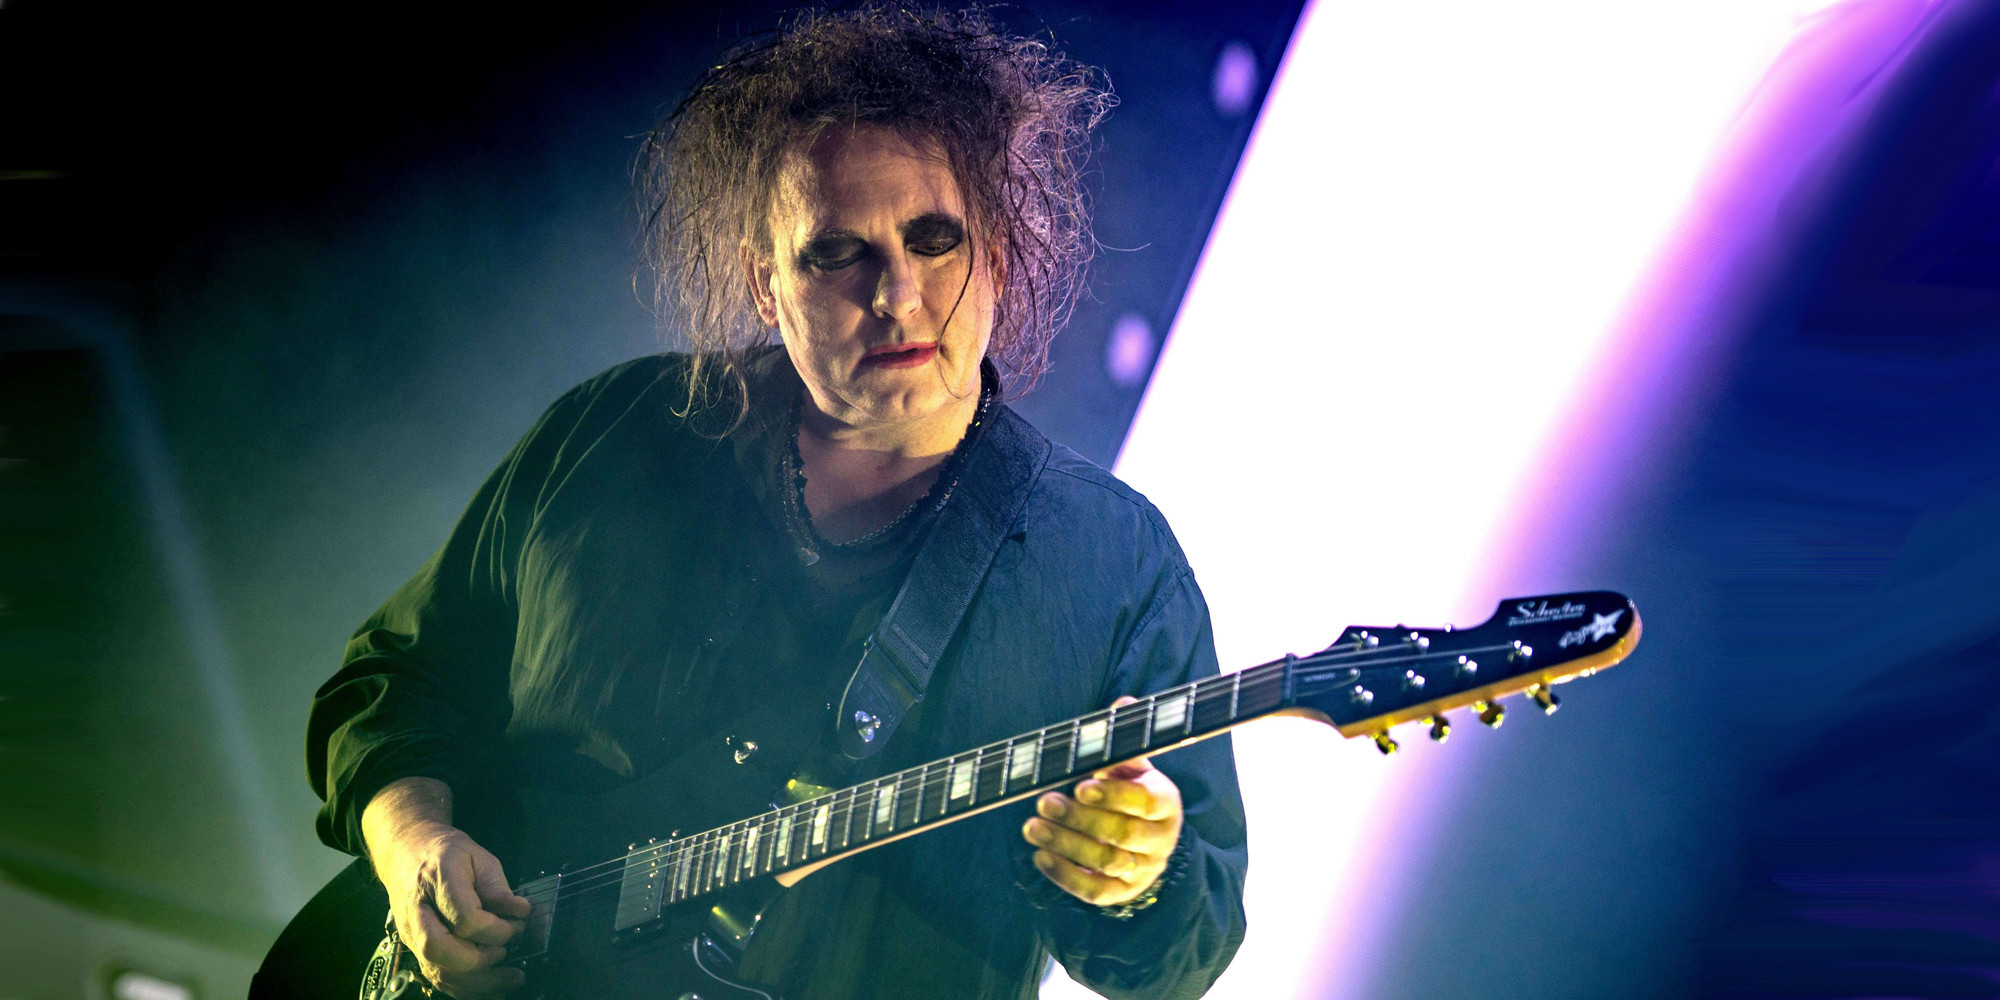 Mandatory Credit: Photo by Valerio Berdini/REX/Shutterstock (7542591j) The Cure - Robert Smith The Cure in concert at Wembley Arena, London, UK - 03 Dec 2016 The Cure on the last date of their world tour 2016, after a year around the world the band closed in style at the Wembley Arena in London /Rex_The_Cure_in_concert_at_Wembley_Arena_Lond_7542591J//1612050900